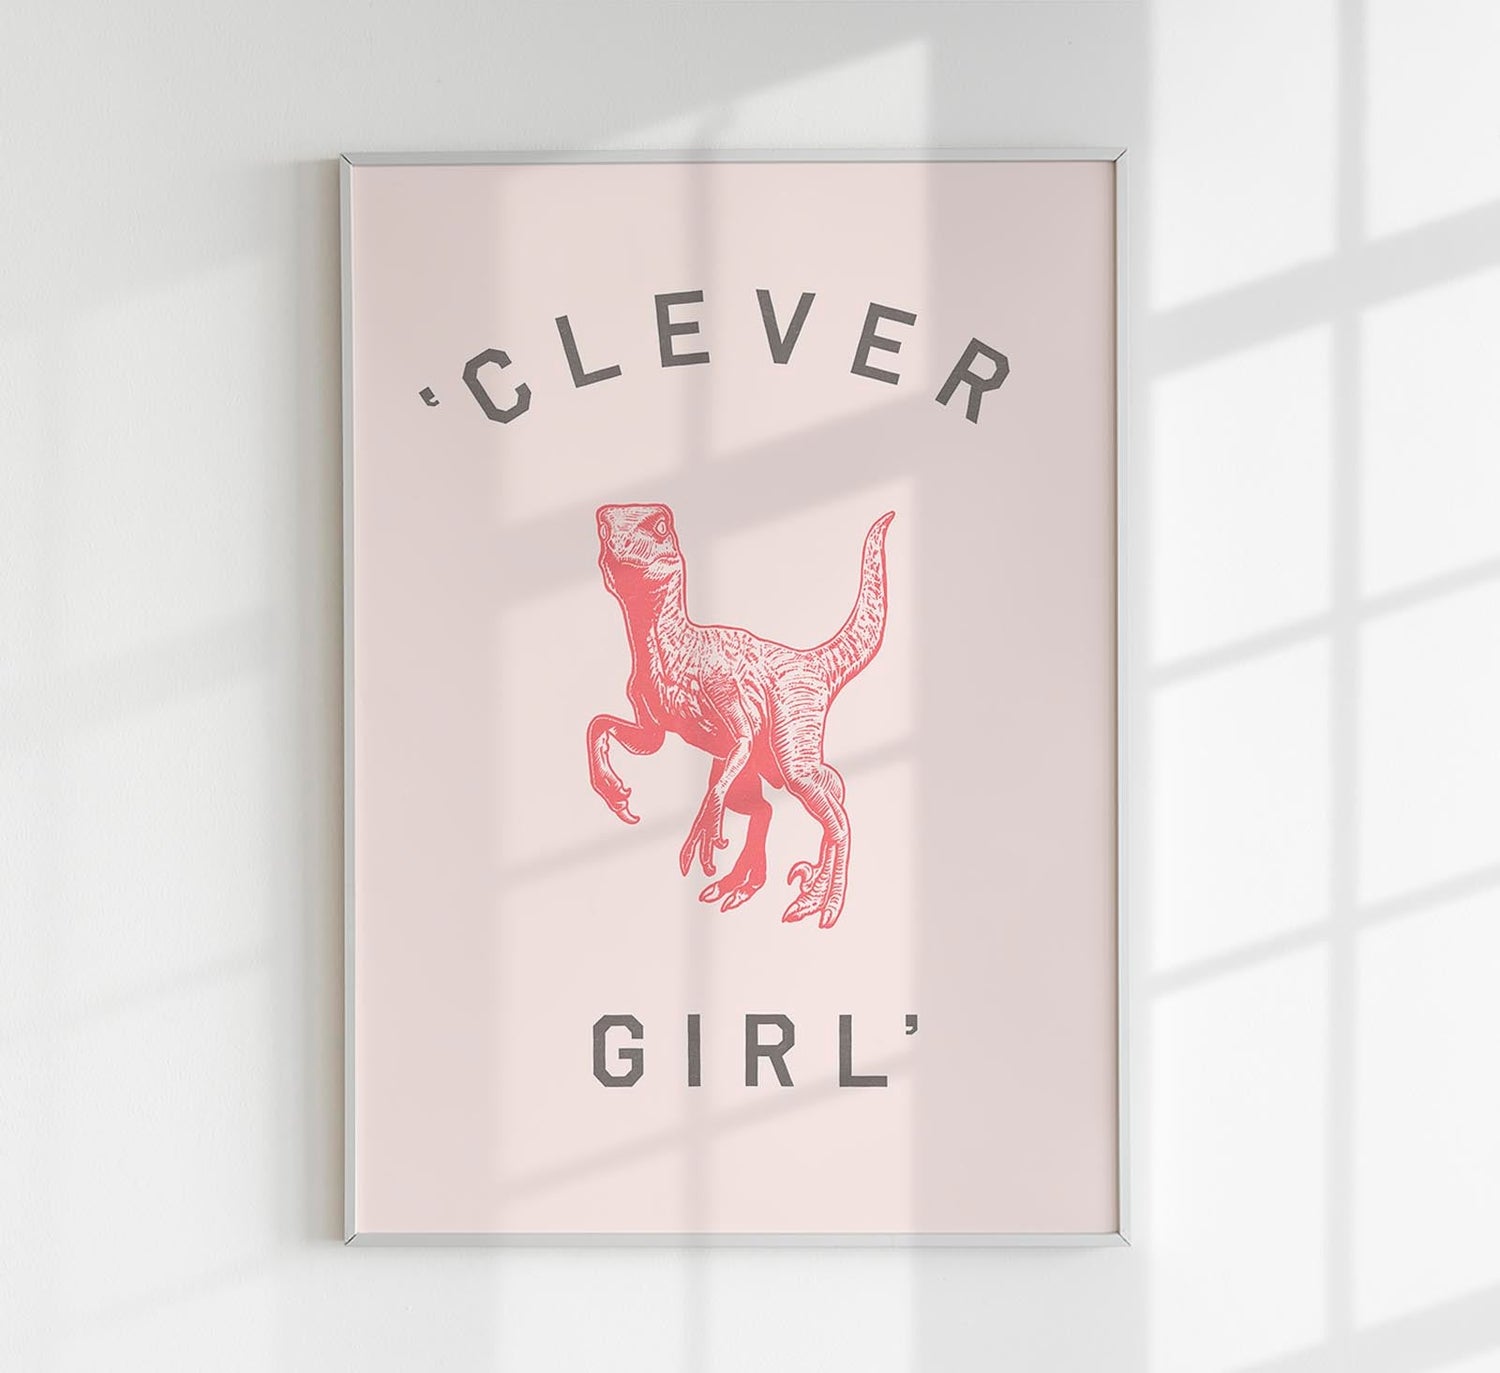 Clever Girl by Florant Bodart